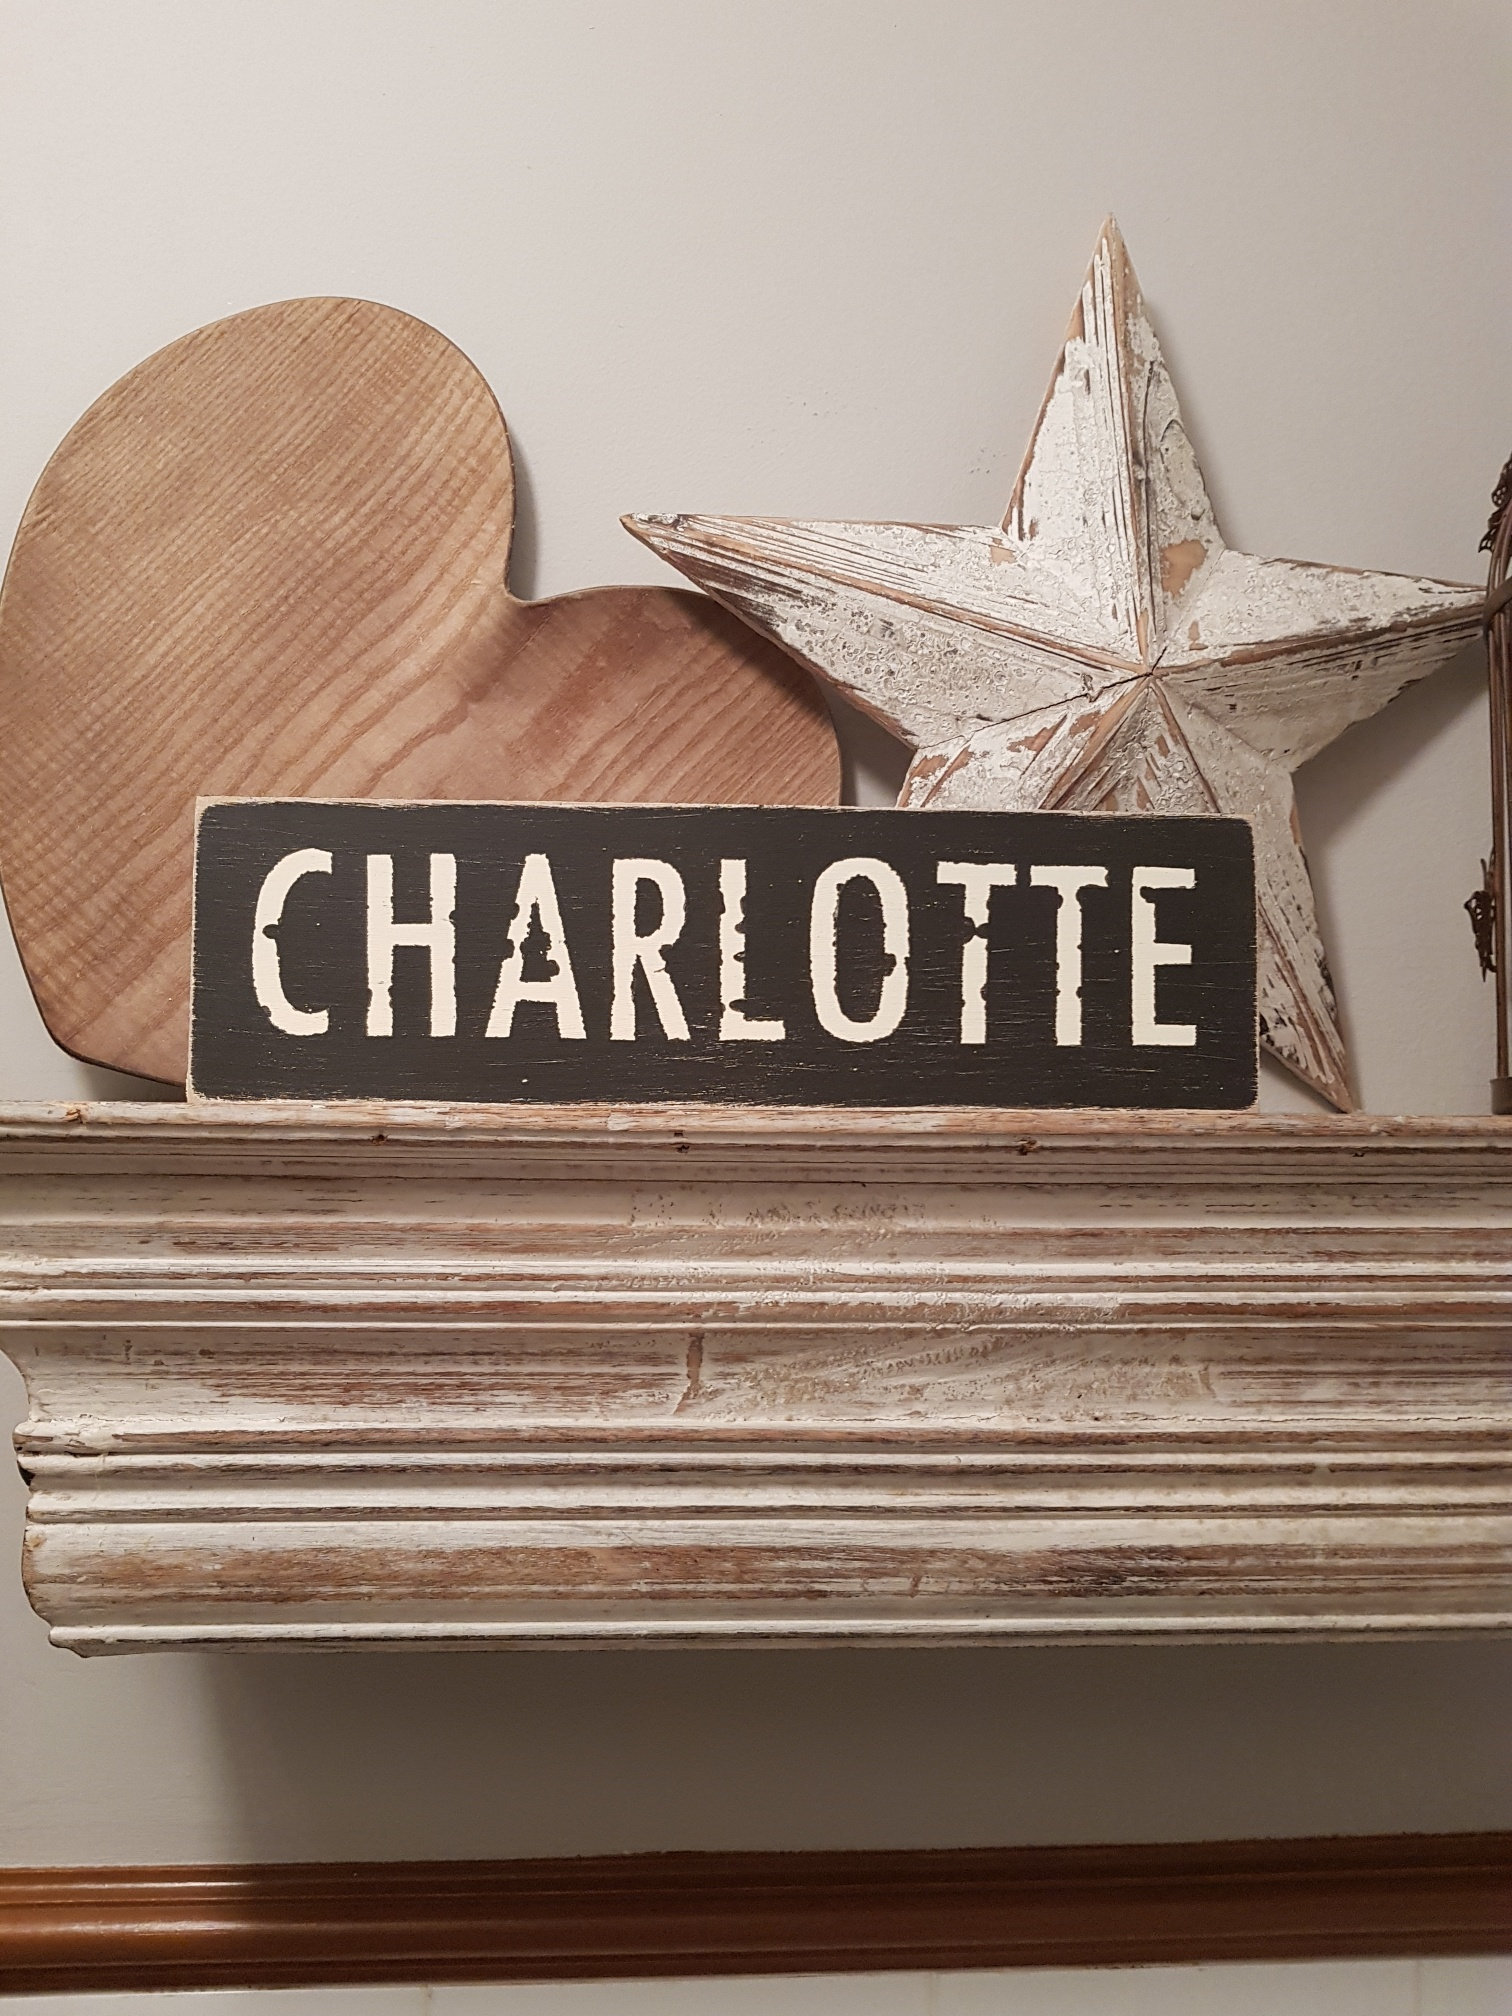 Painted Wooden Sign Rustic Vintage Shabby Chic Charlotte